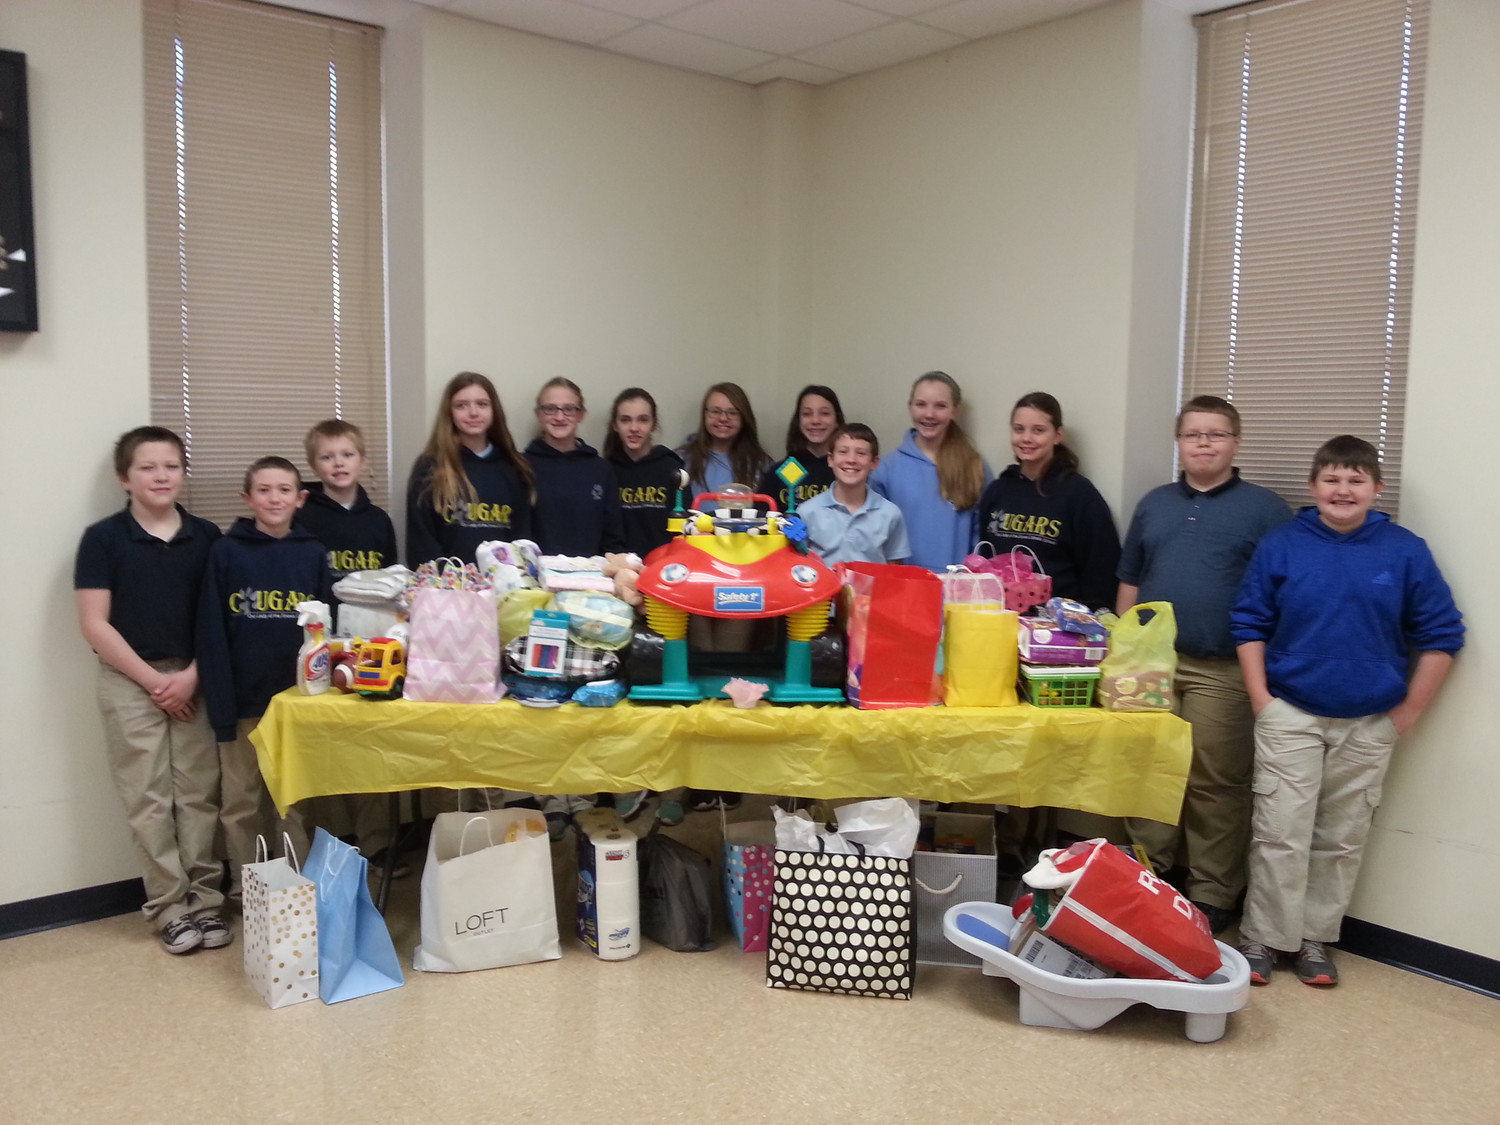 Members of the student council of Our Lady of Lourdes Interparish School in Columbia display the gifts they received at a baby shower they organized for the St. Raymond’s Society, a comprehensive ministry for woman who are in crisis pregnancies, and their babies.